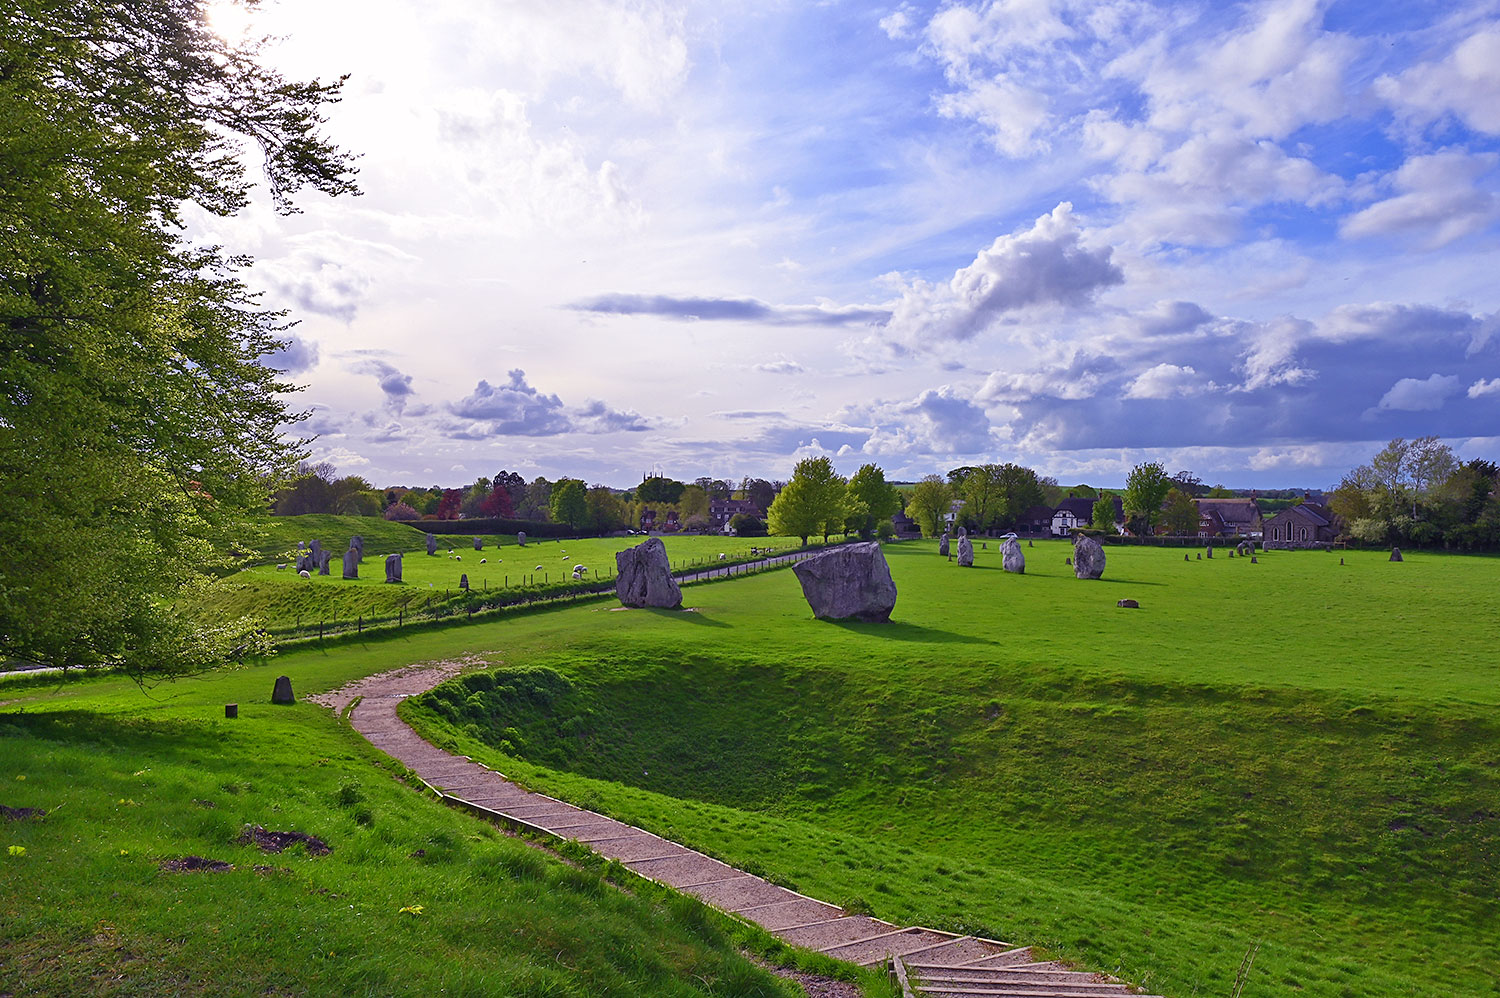 Picture of a stone circle seen from an embankment on a May evening with sunny intervals